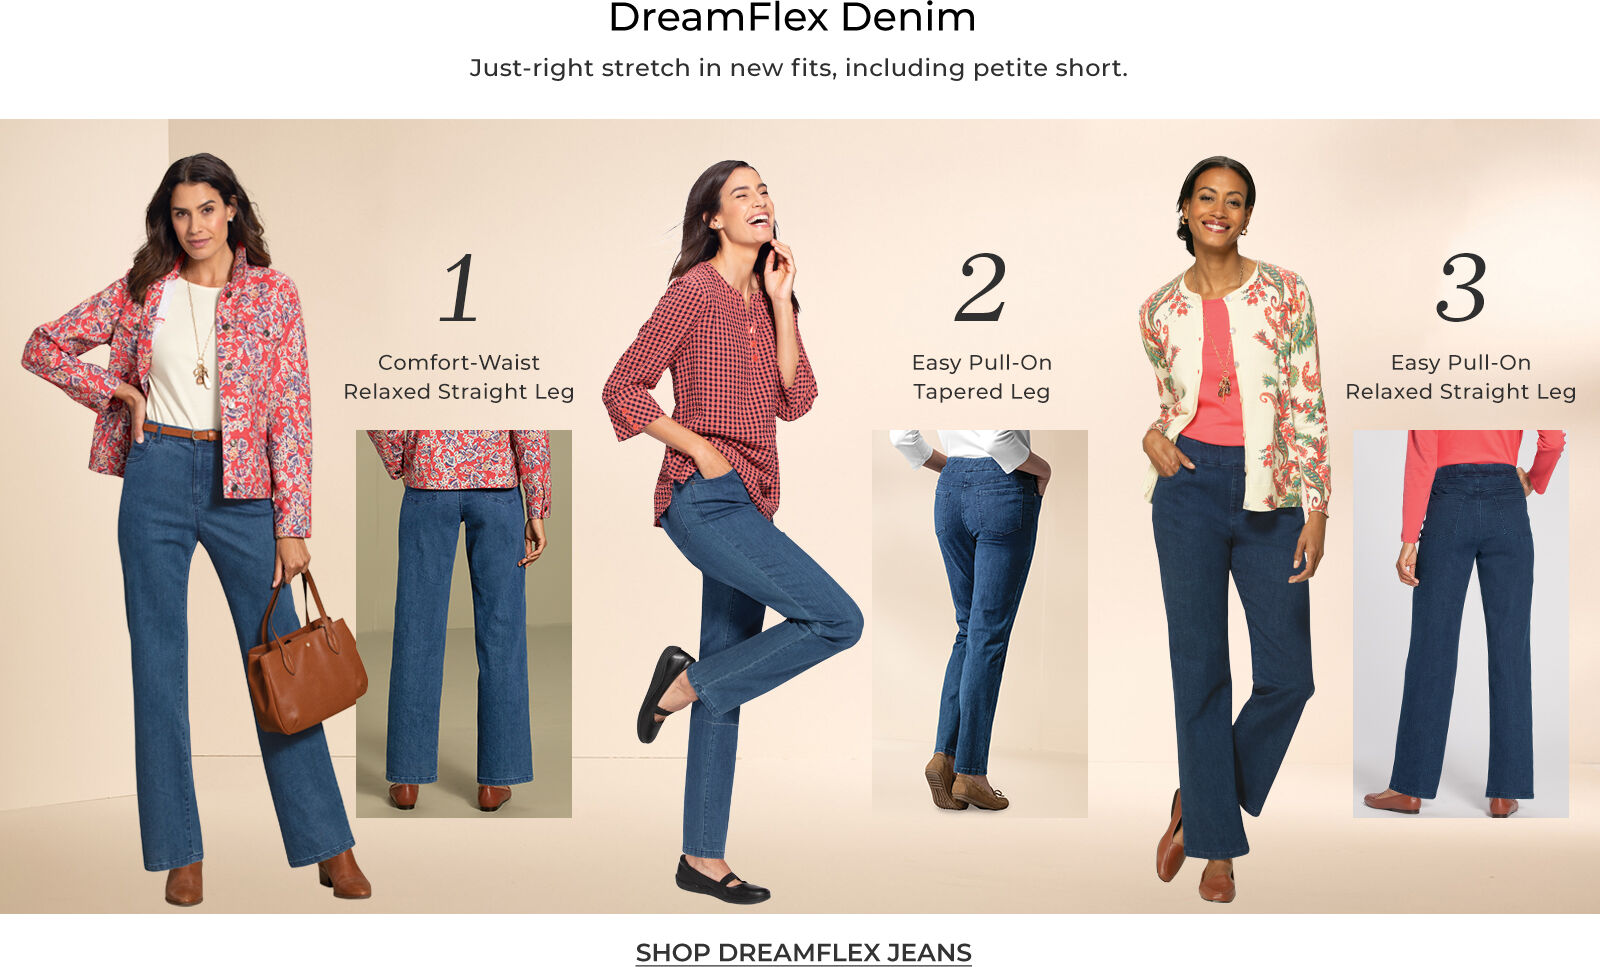 dreamflex denim just-right stretch in new fits, including petite short. 1 comfort waist relaxed straight leg 2 easy pull-on tapered leg 3 easy pull-on relaxed straight leg shop dreamflex jeans